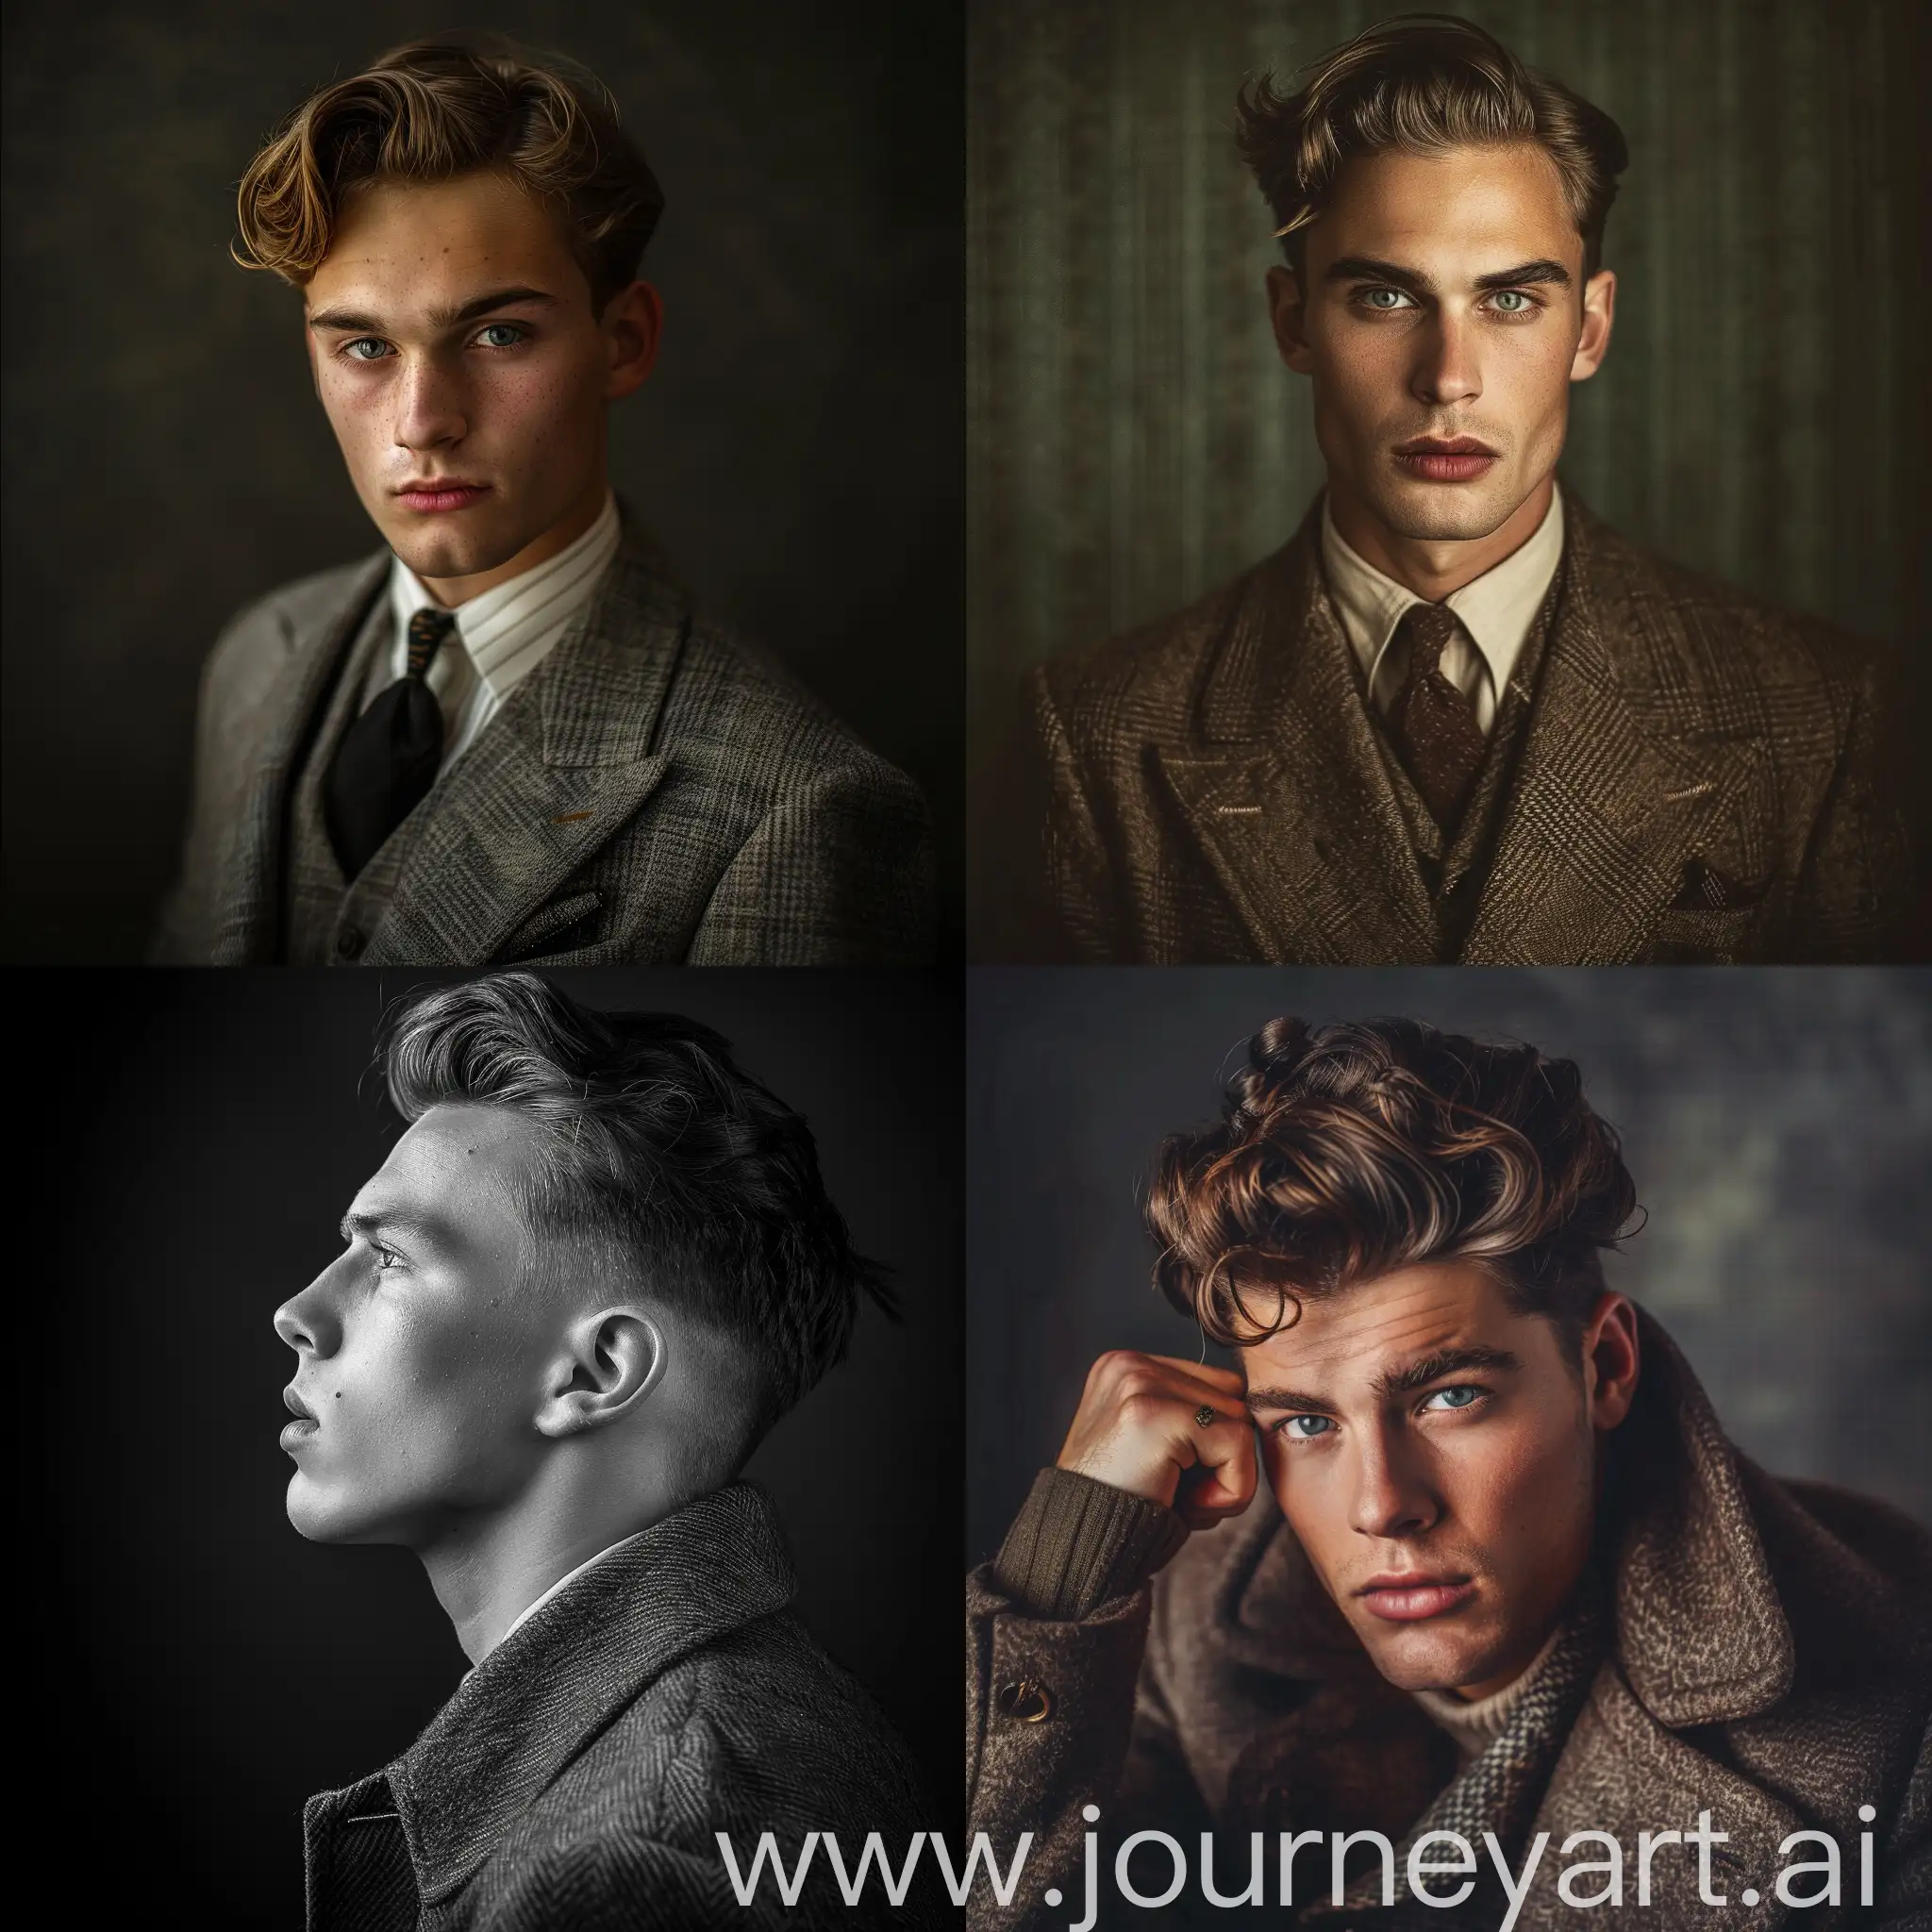 Hyperrealistic-Retro-Style-Portrait-20YearOld-English-Man-in-1940s-Hollywood-Glamour